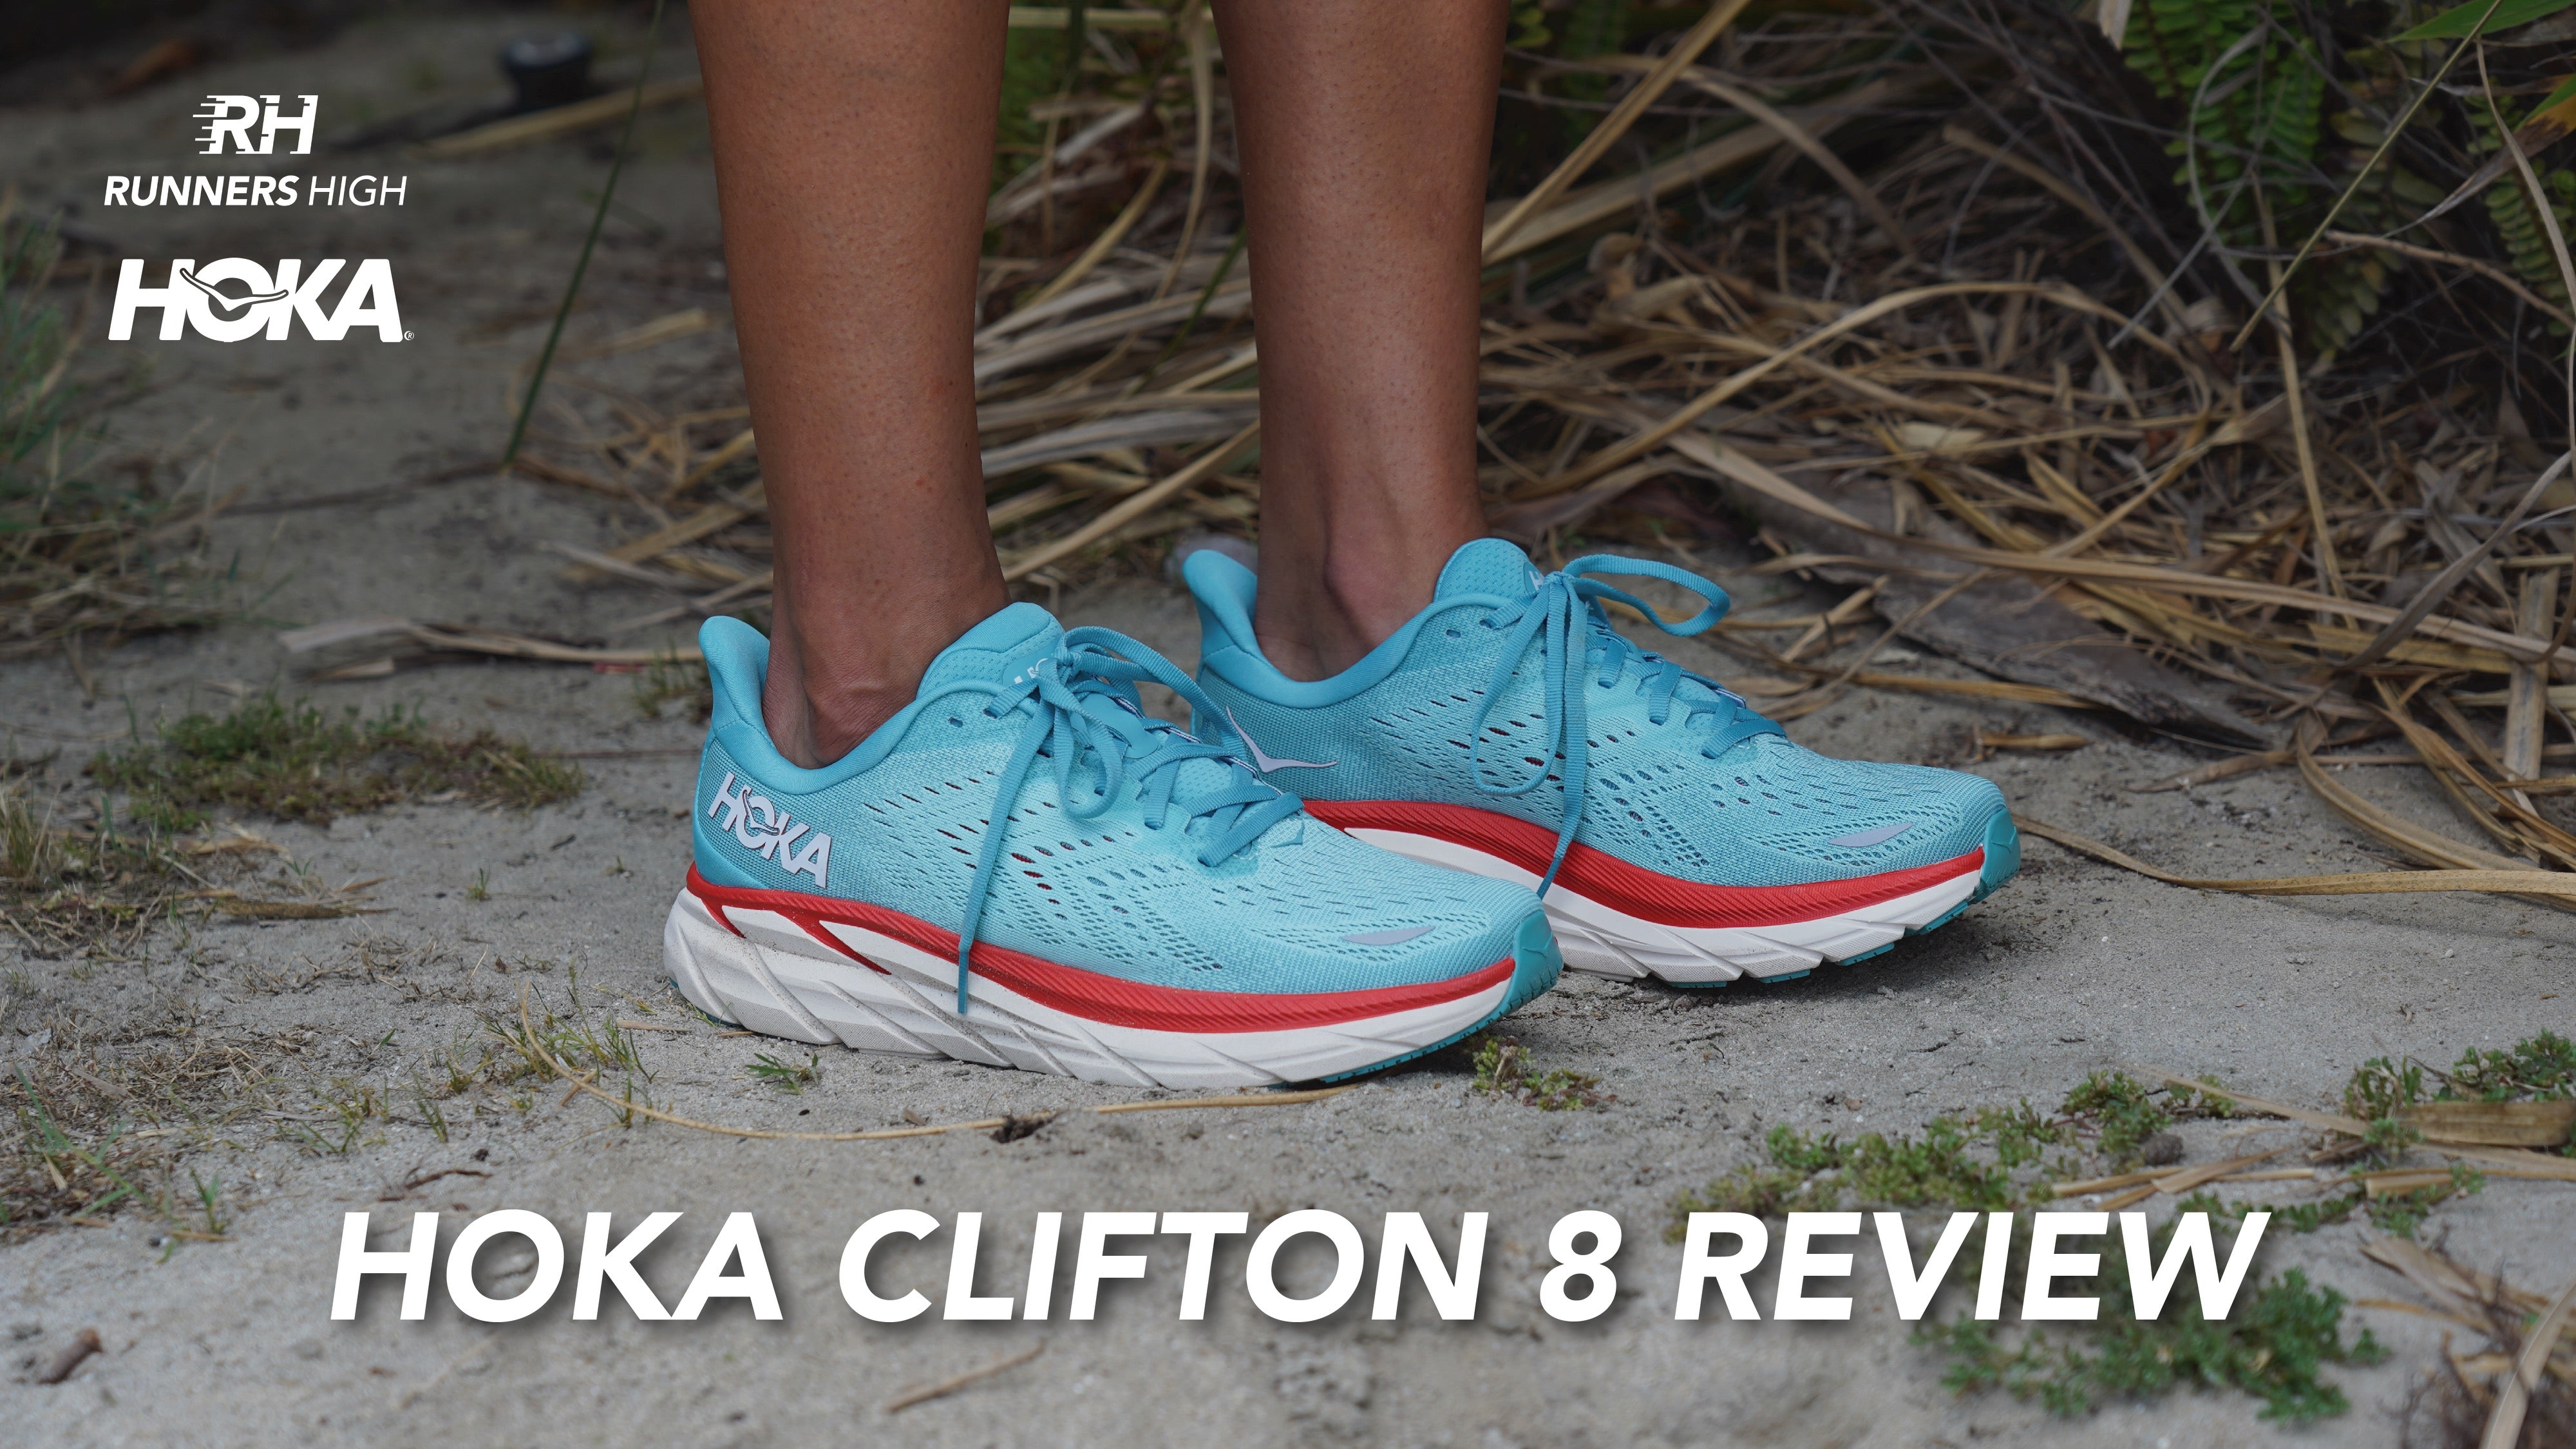 The Hoka One One Clifton 8 Review – Runners High